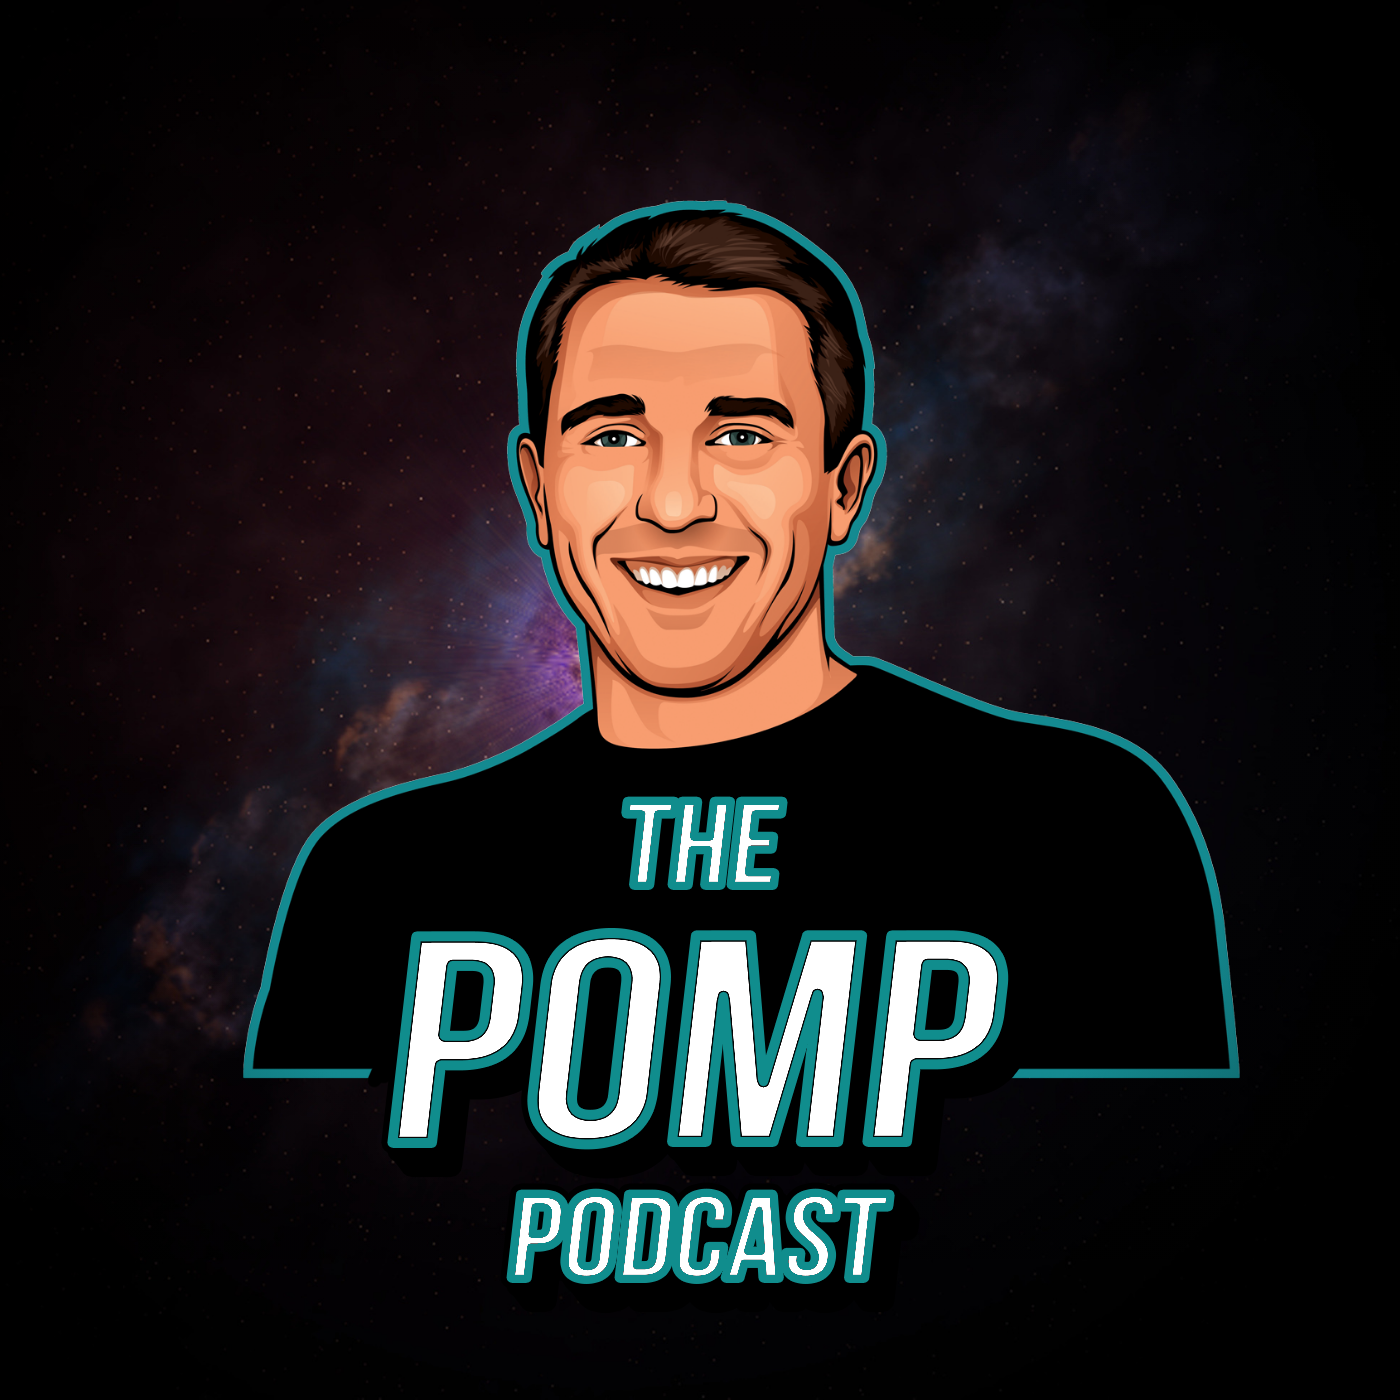 Pomp Advised Mitch Garber to Put 2% of His Net Worth in Bitcoin